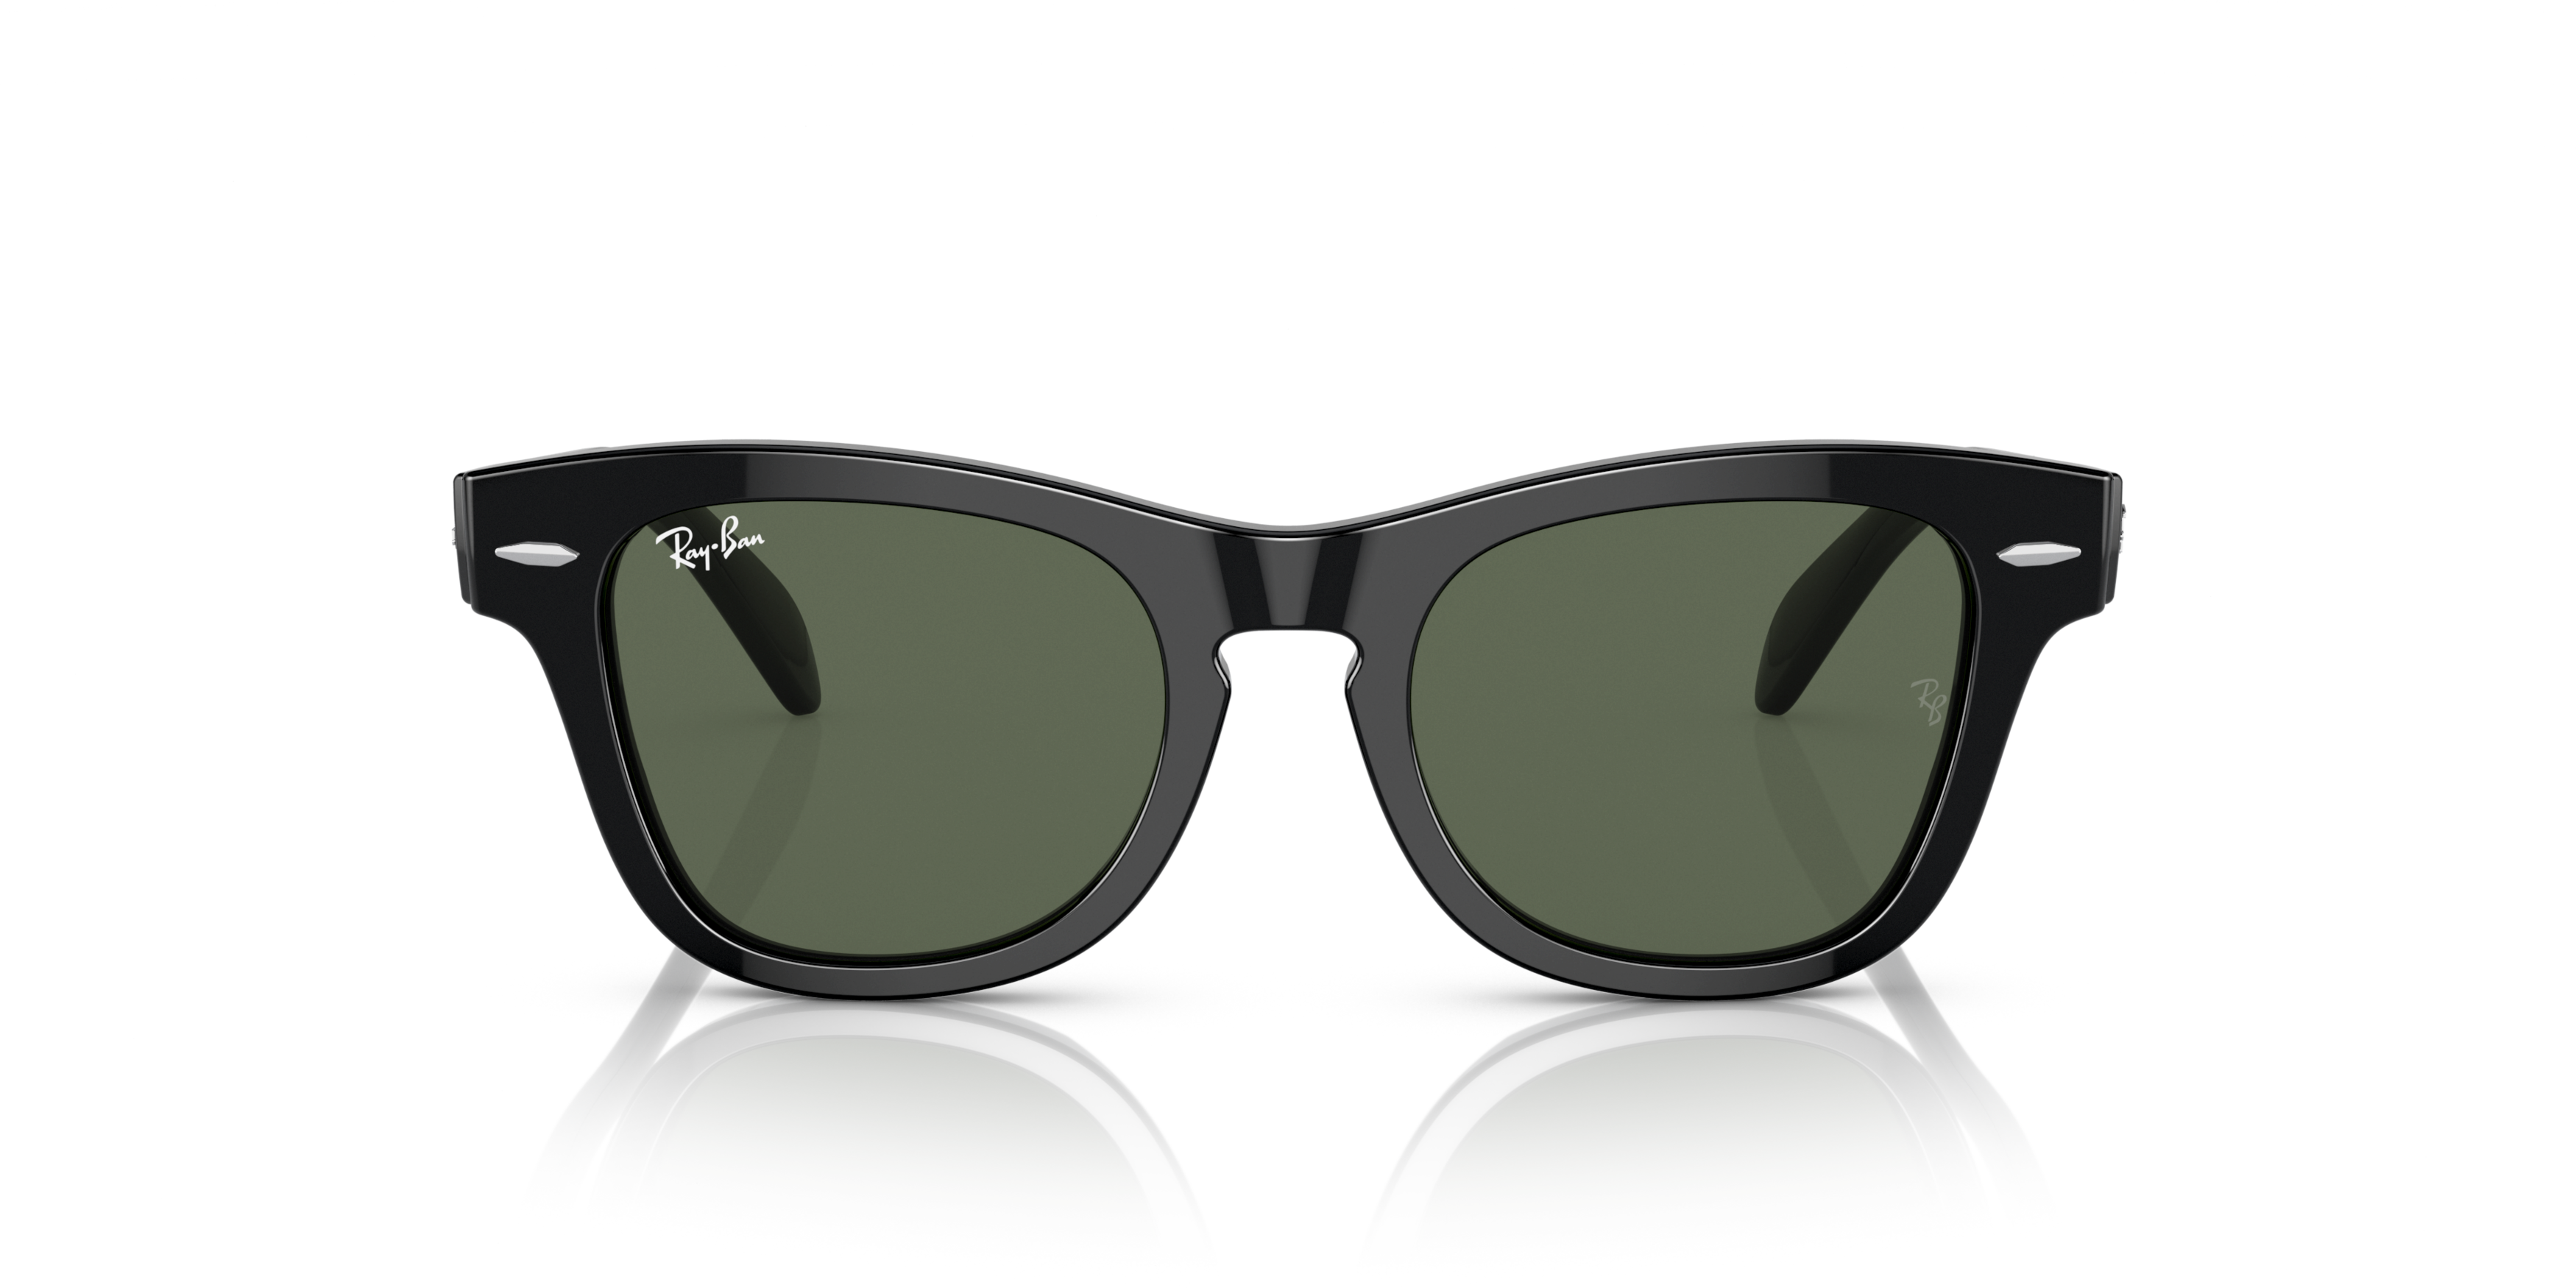 [products.image.front] Ray-Ban Junior 0RJ9707S 100/71